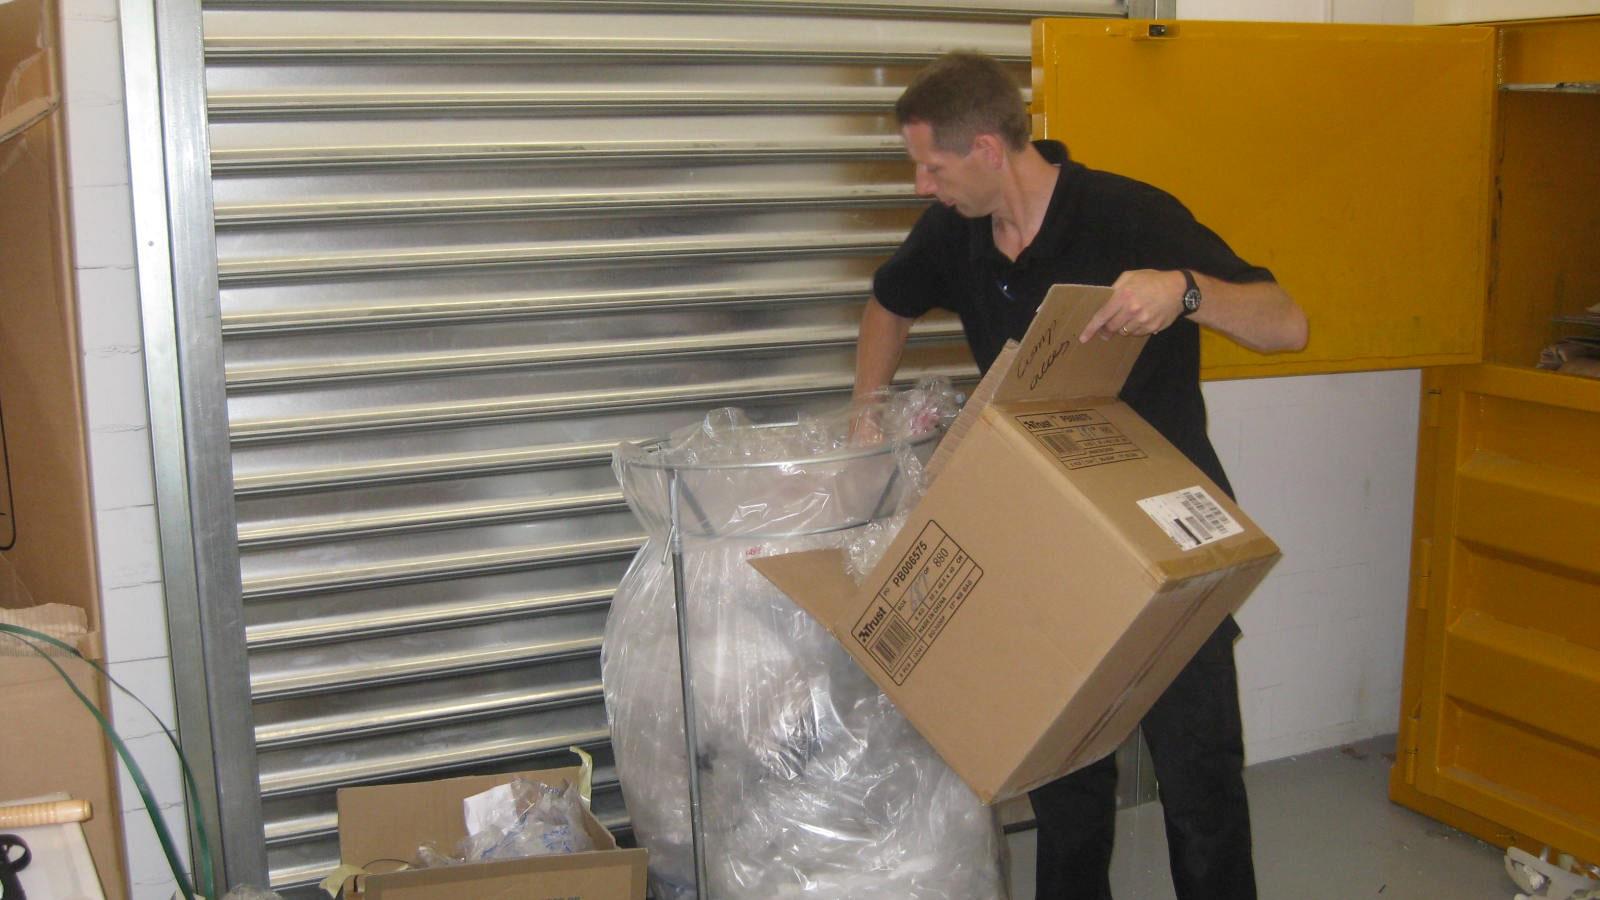 Employee from Media Markt puts soft plastic waste in recyling rack